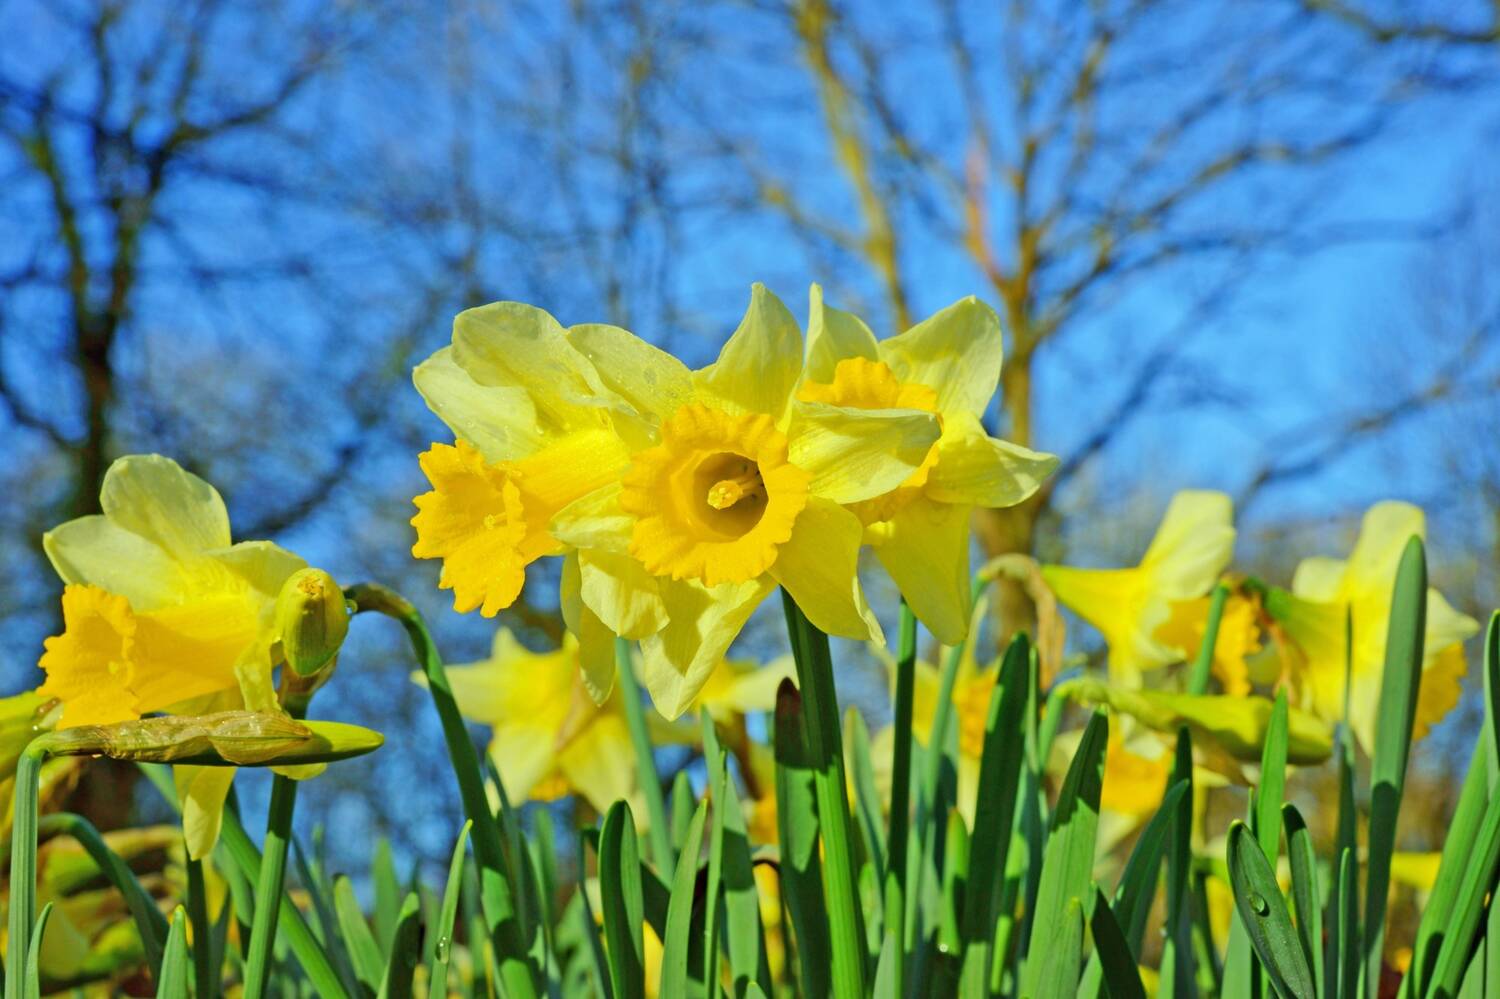 A close up of a host of bright yellow daffodils, set against a bright blue sky background.